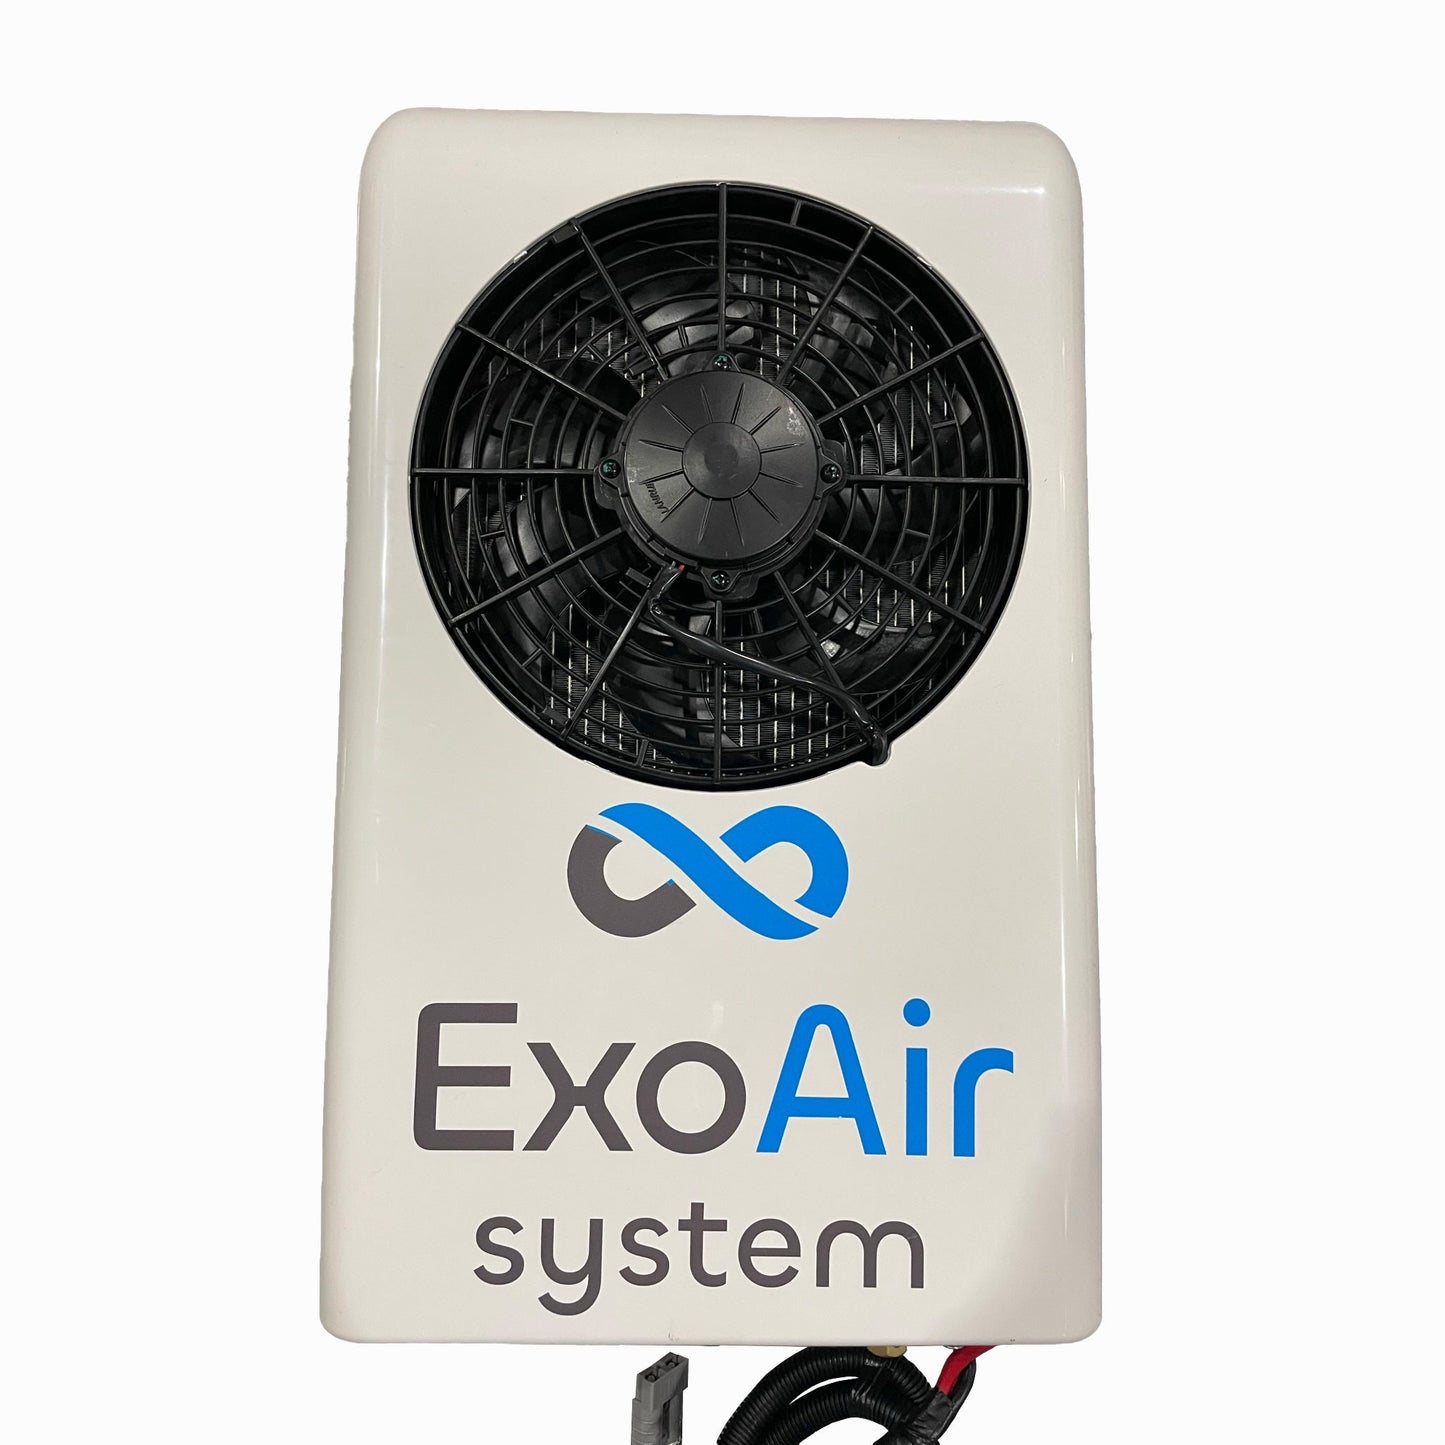 Exoair System - Electrical Air Conditioner